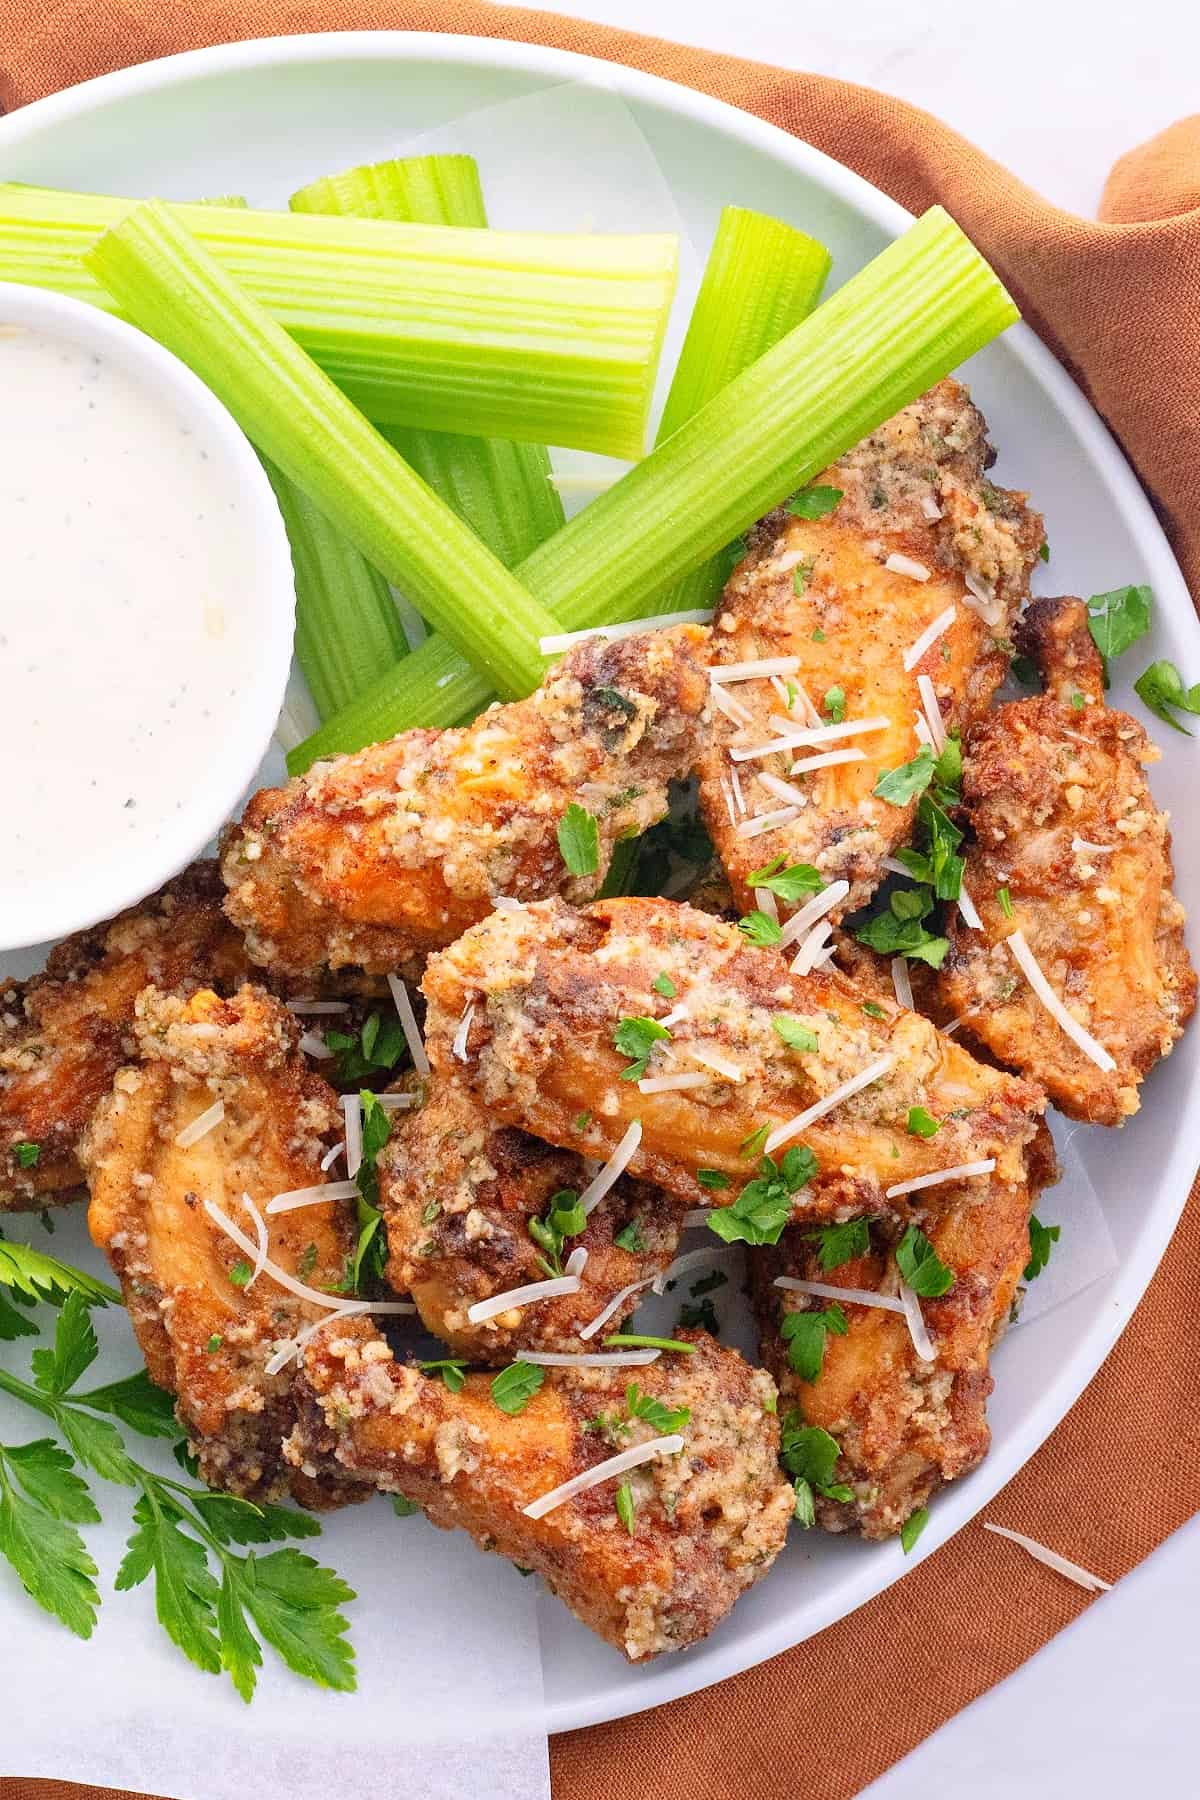 Overhead view of a plate of wings topped with chopped parsley, next to a bowl of ranch and some celery sticks